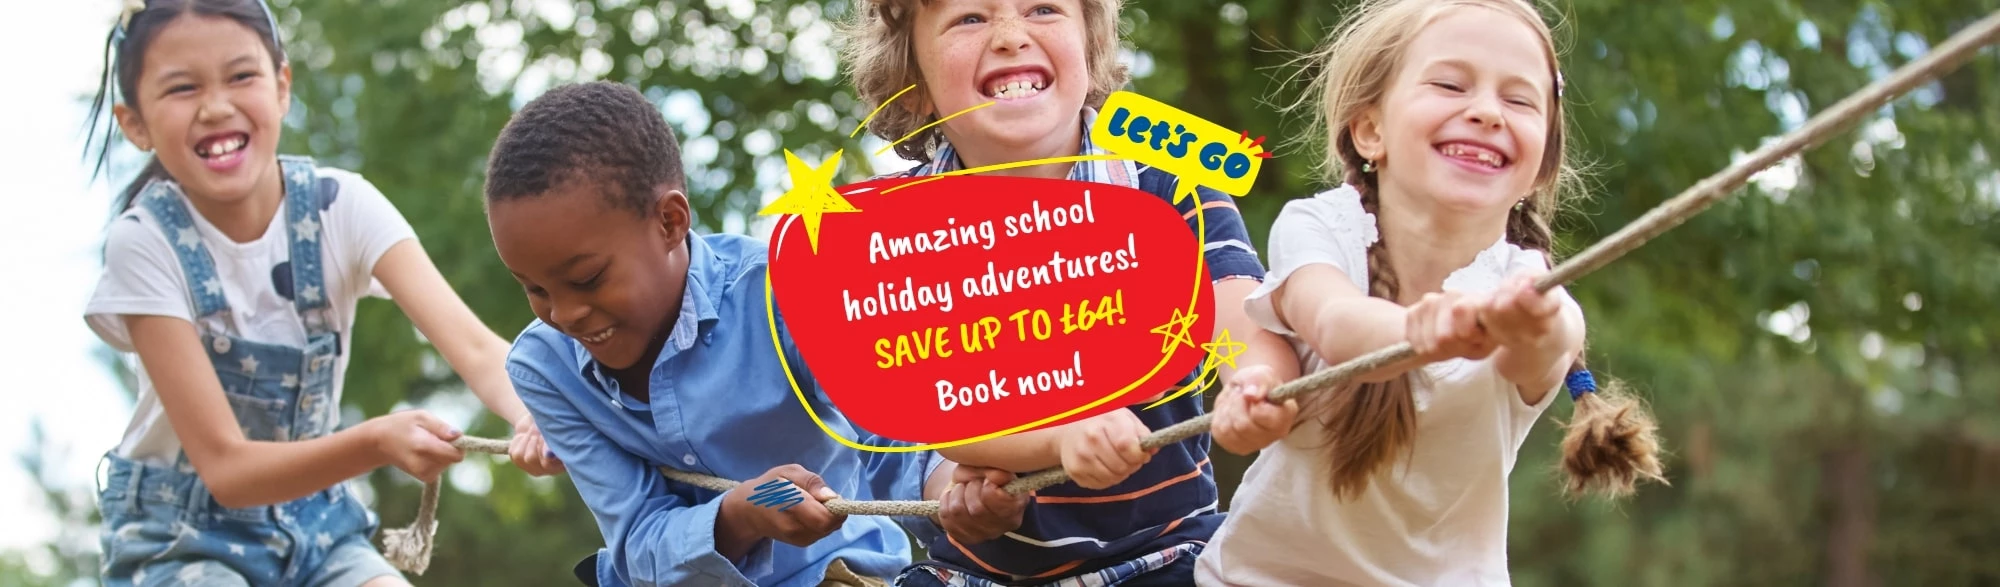 Save up to £64 on school holiday childcare